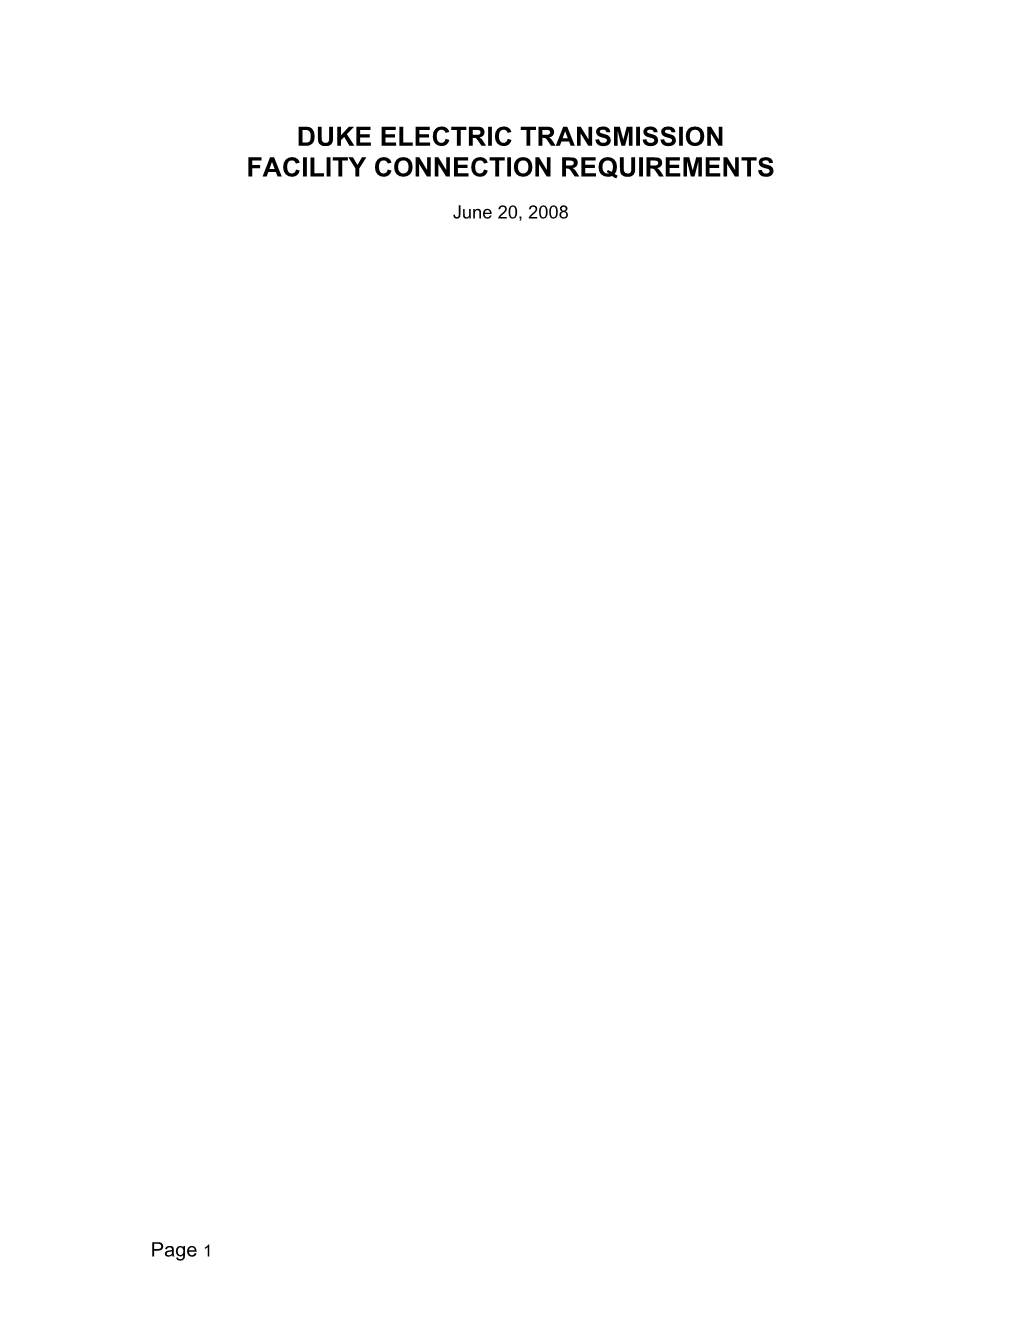 DUKE ELECTRIC TRANSMISSION Facility Connection Requirements